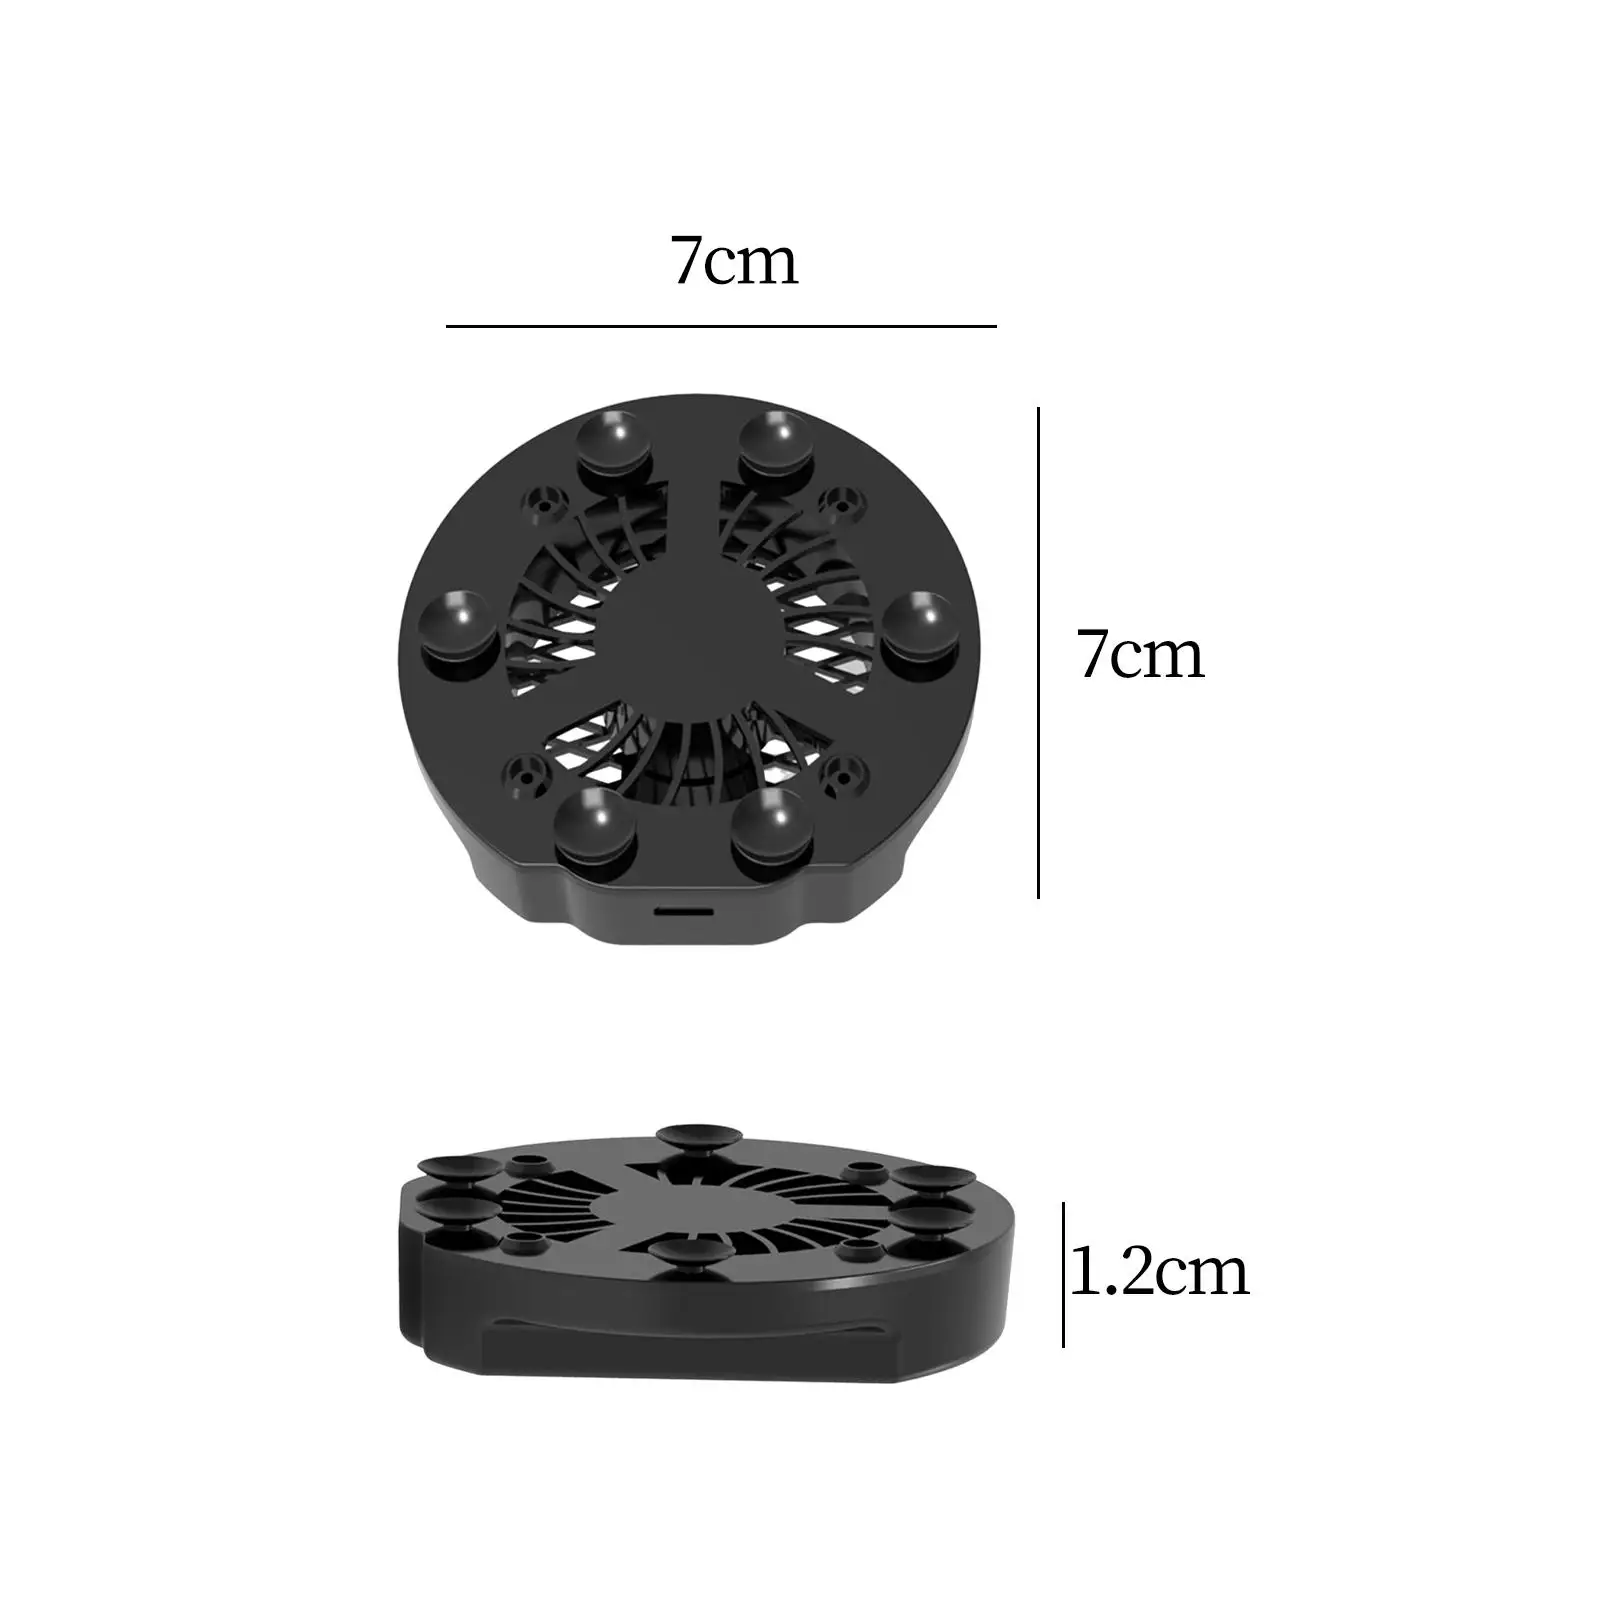 Mini Phone Cooler Radiator Holder USB Portable Folding Suction Cup Cooling Fan for Watching Video Mobile Gaming Live Streaming